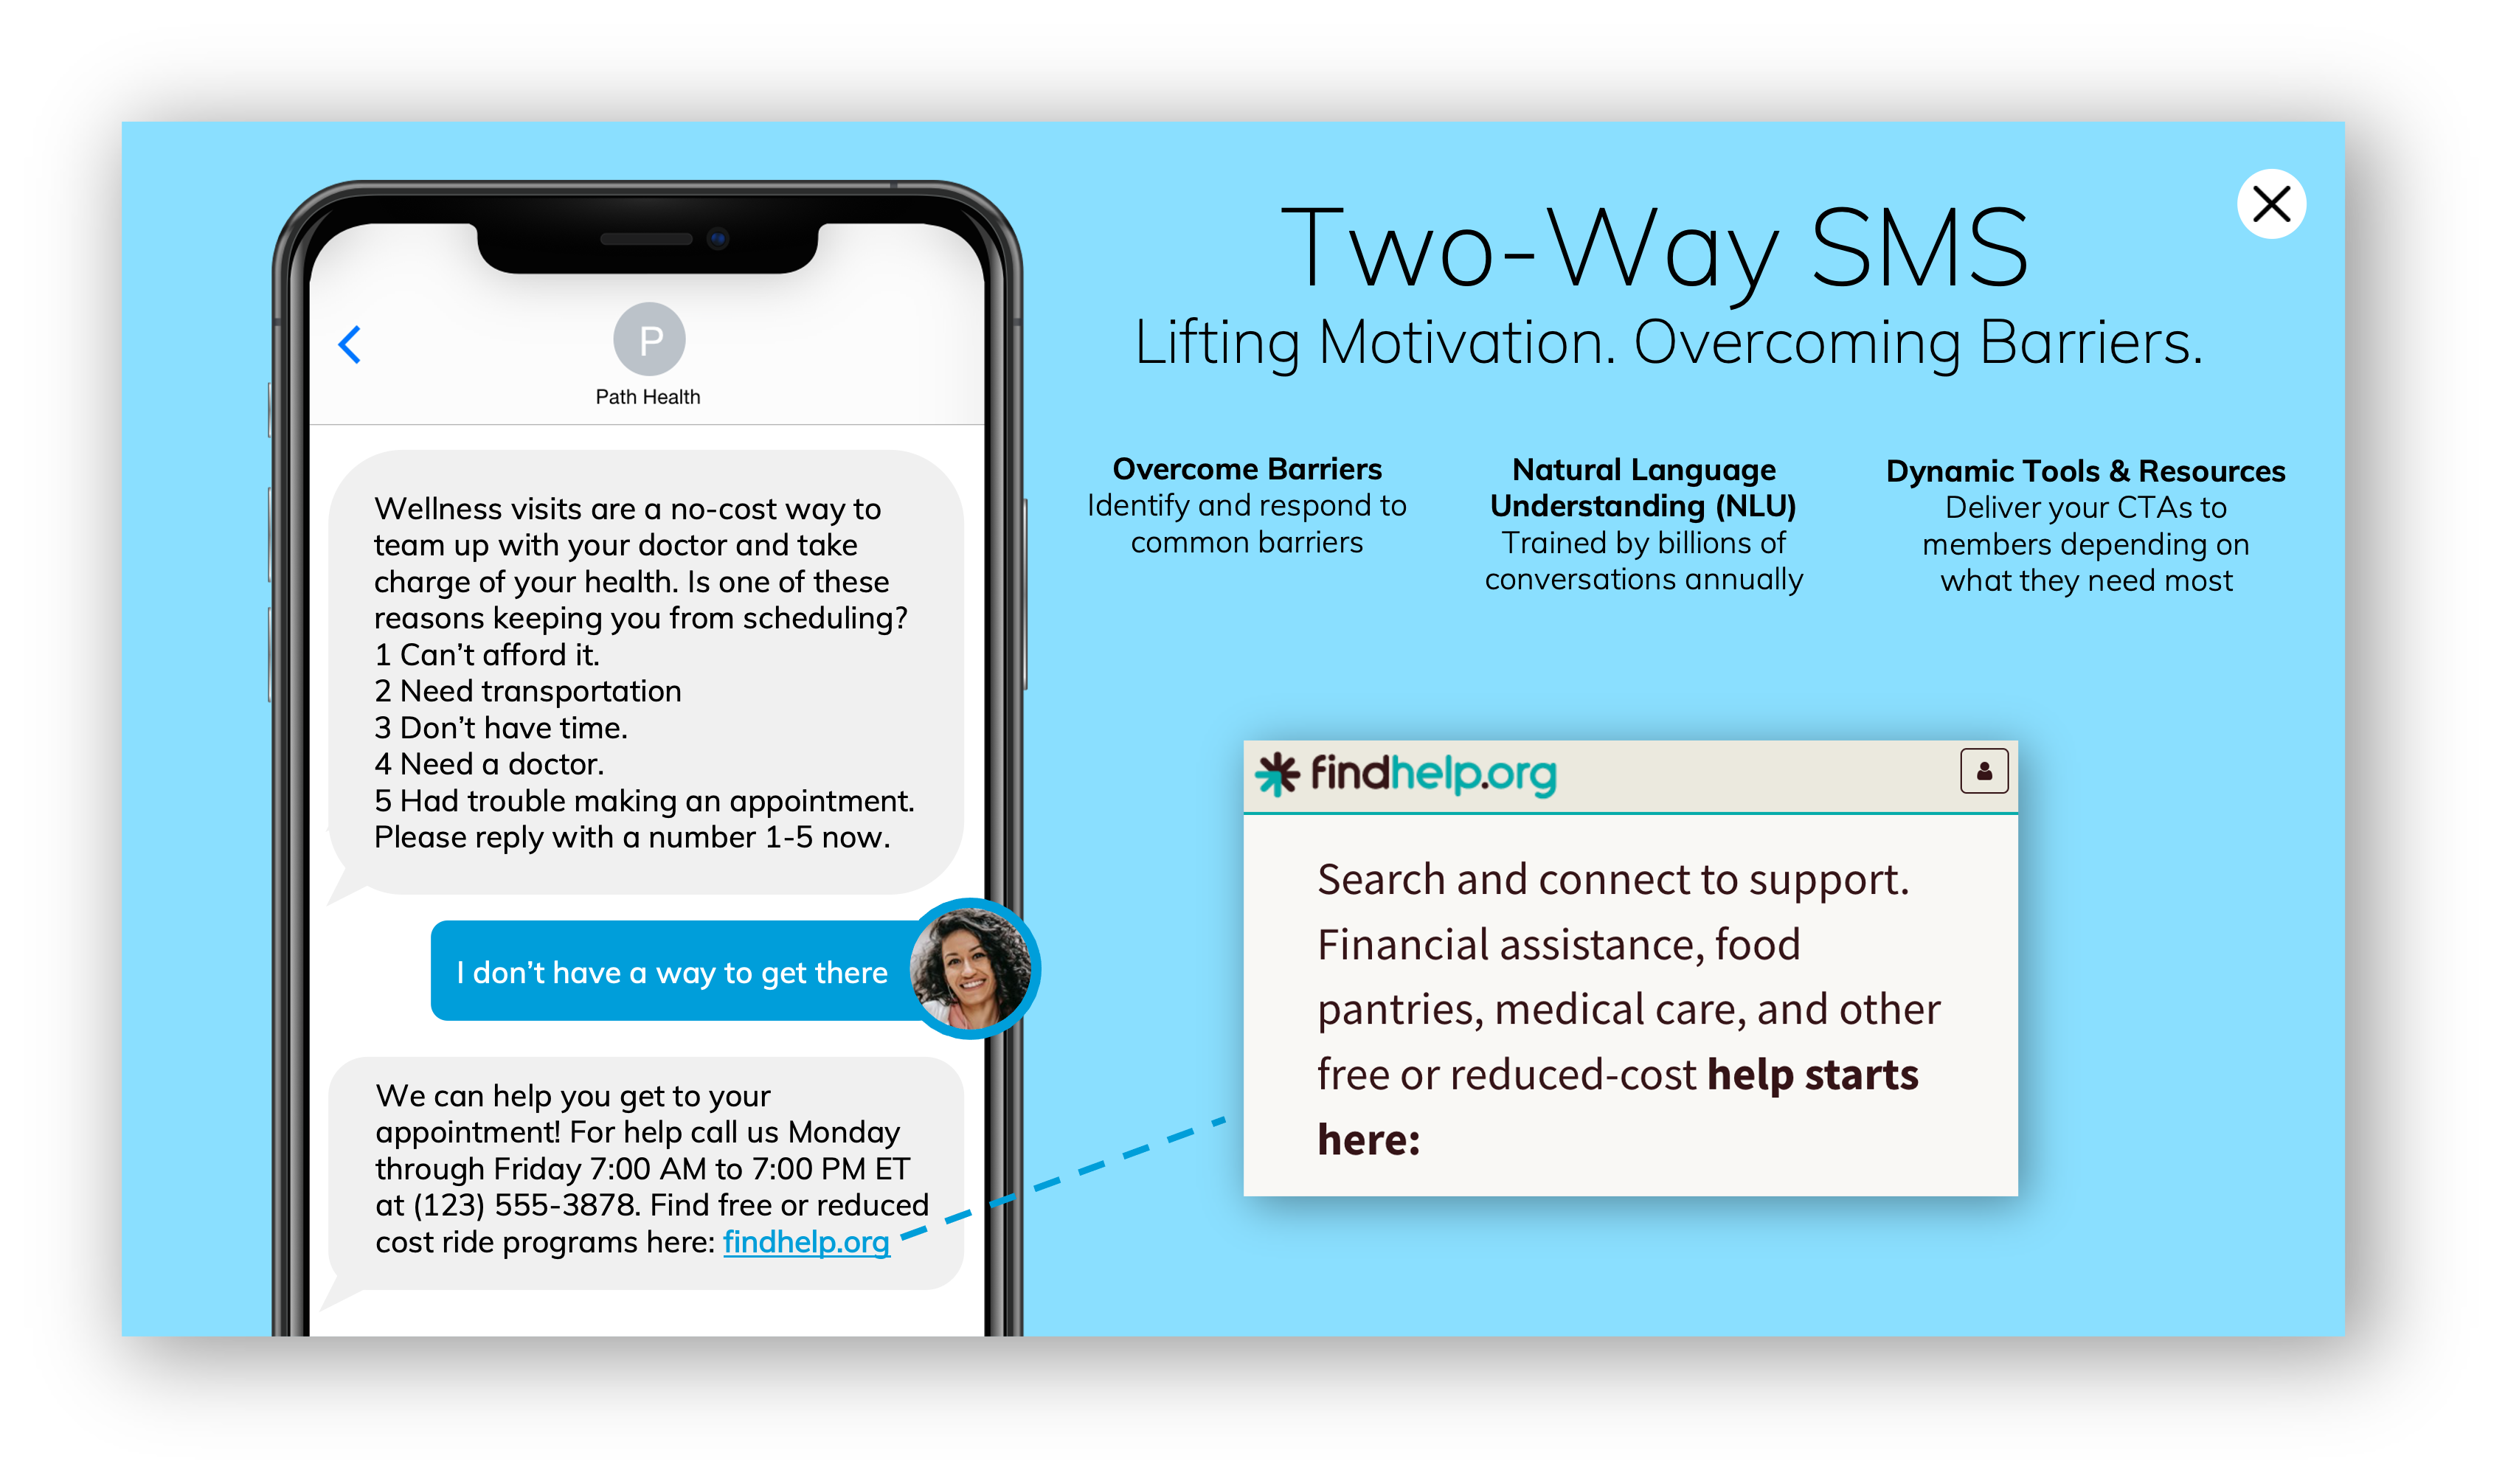 mPulse Mobile's two-way SMS technology identifies barriers and effortlessly guides patients to schedule their Annual Wellness Visit